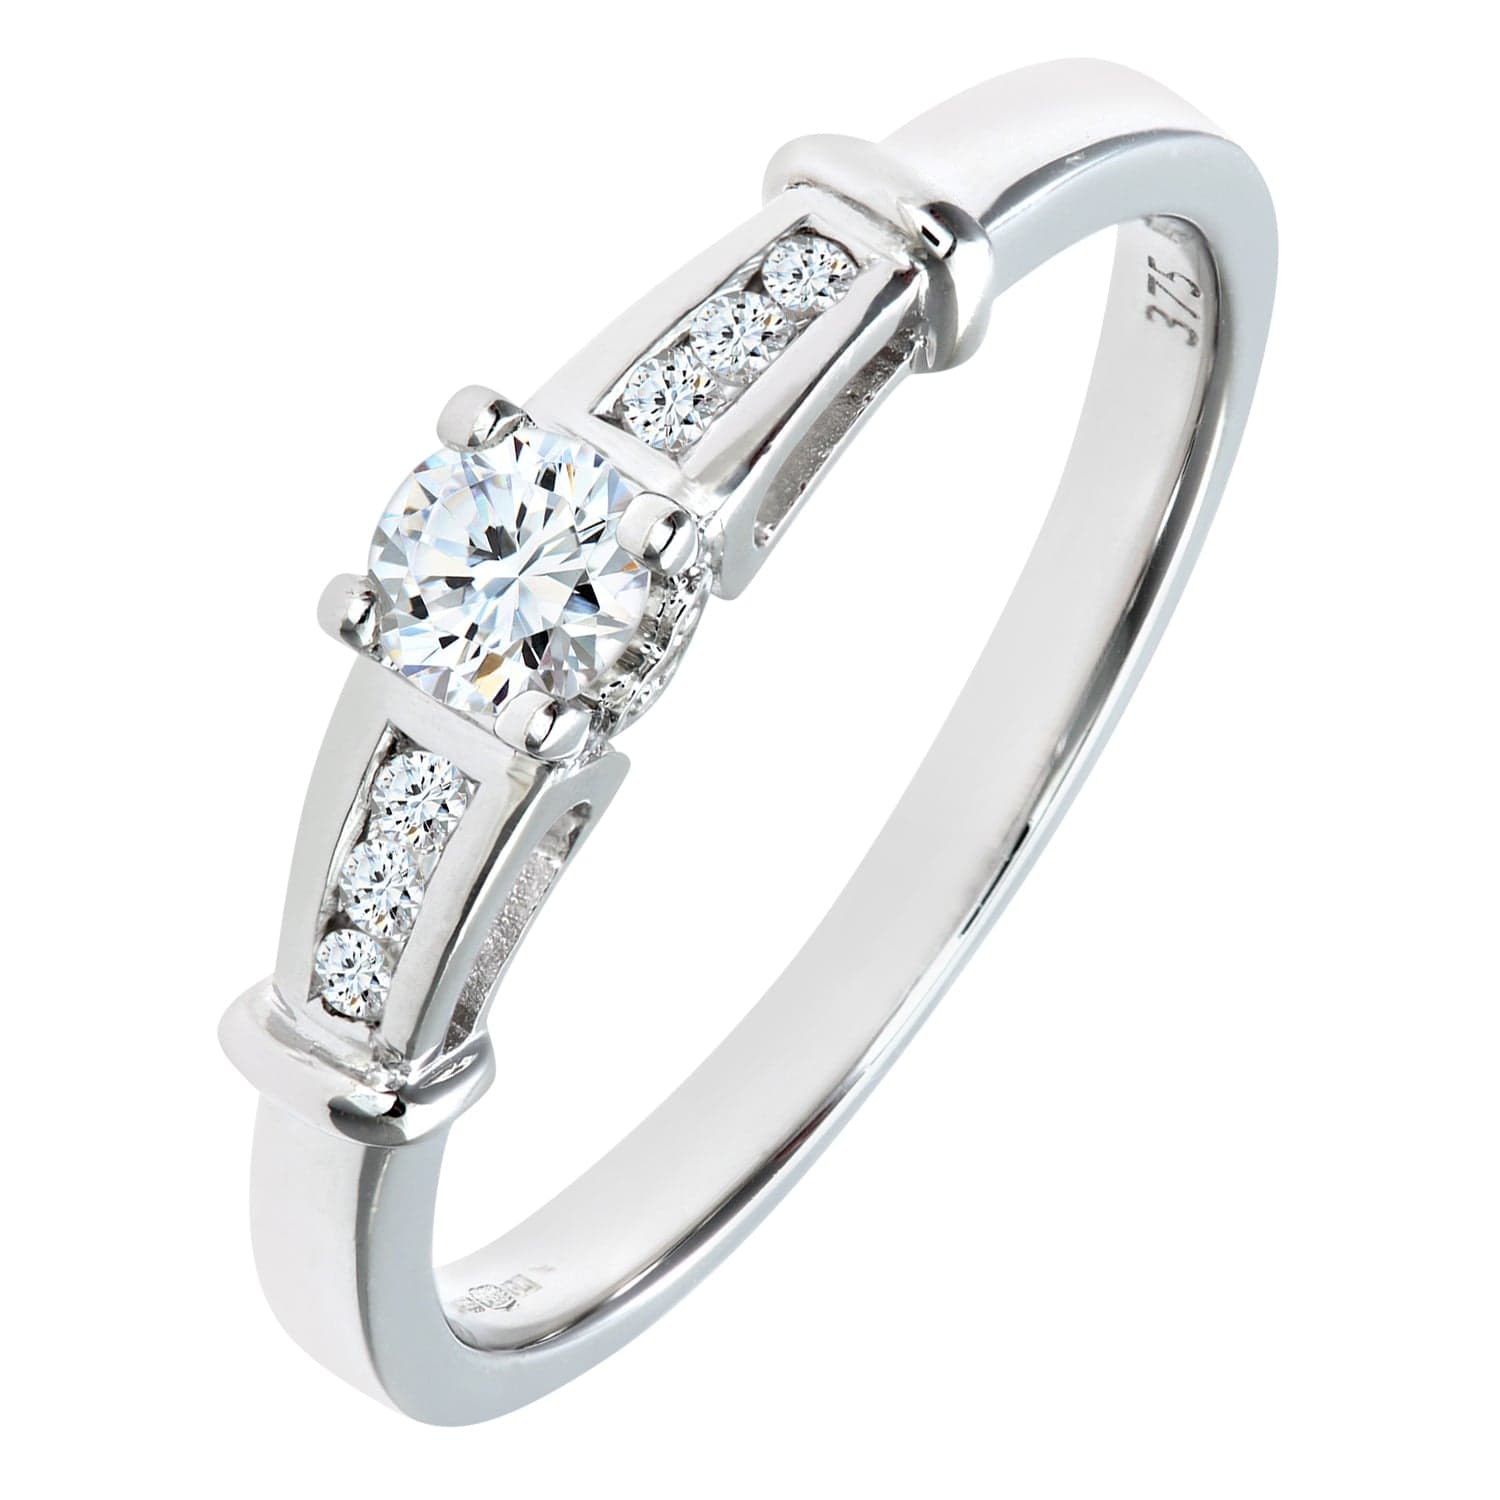 Lynora Luxe Ring White Gold 9ct / Diamond 9ct White Gold 0.25ct Diamond Engagement Ring